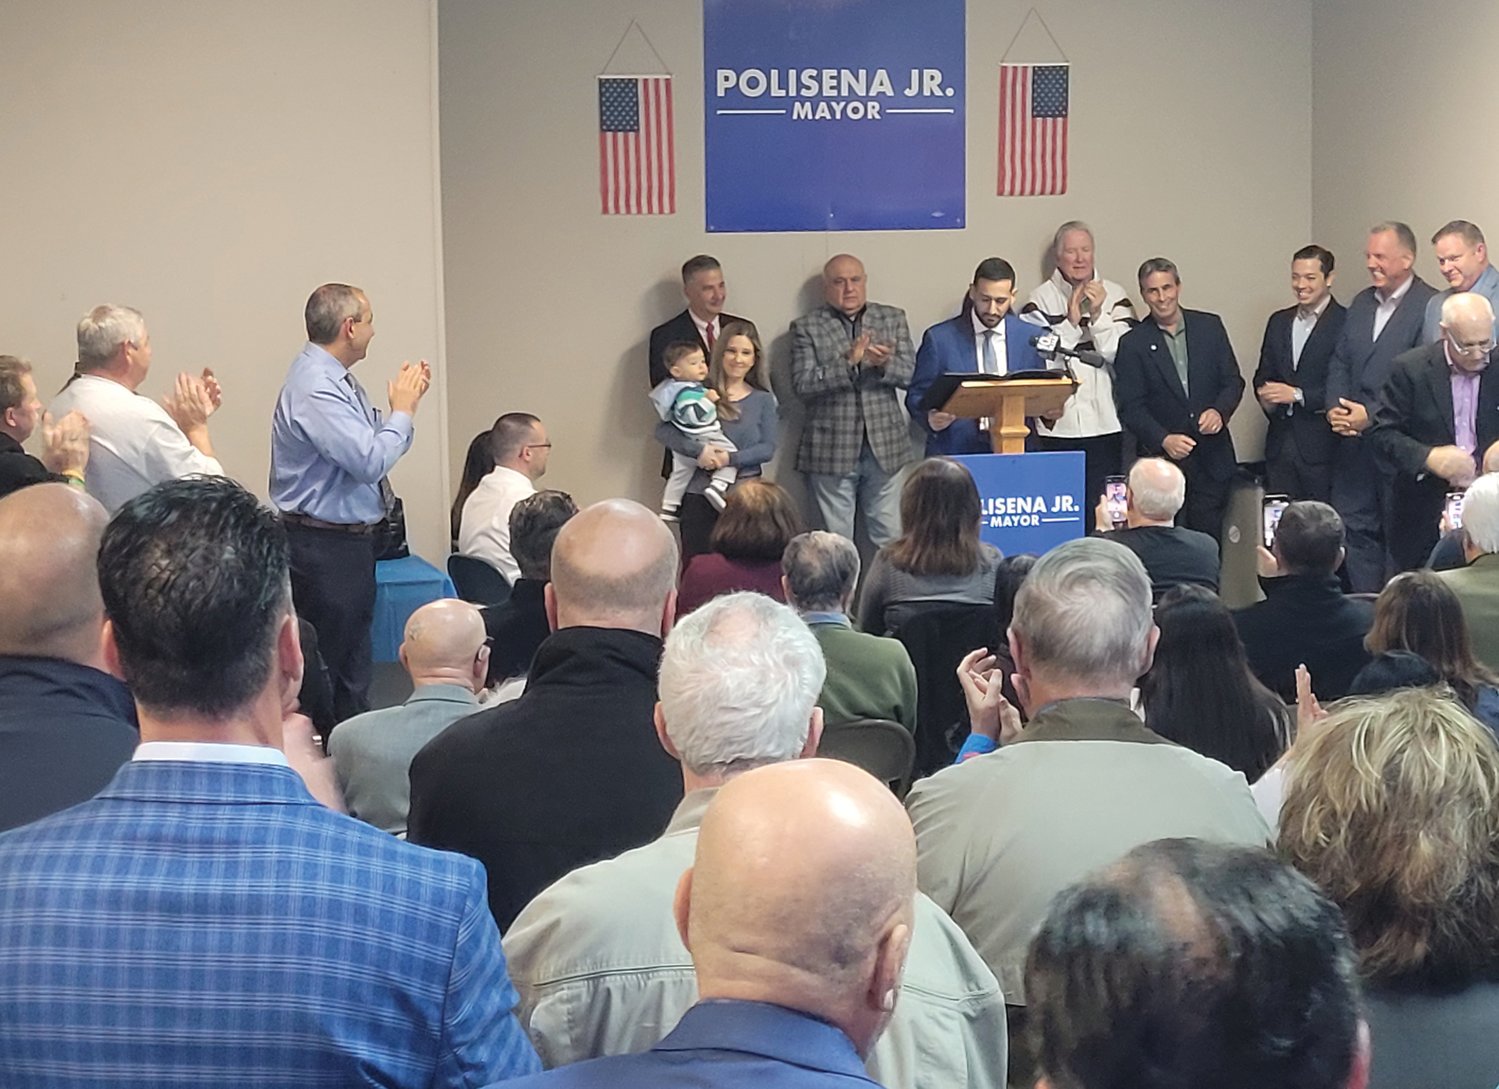 BIG CROWD: Joe Polisena Jr. announced his candidacy for mayor, in front of friends, family, local politicians and key community representatives.